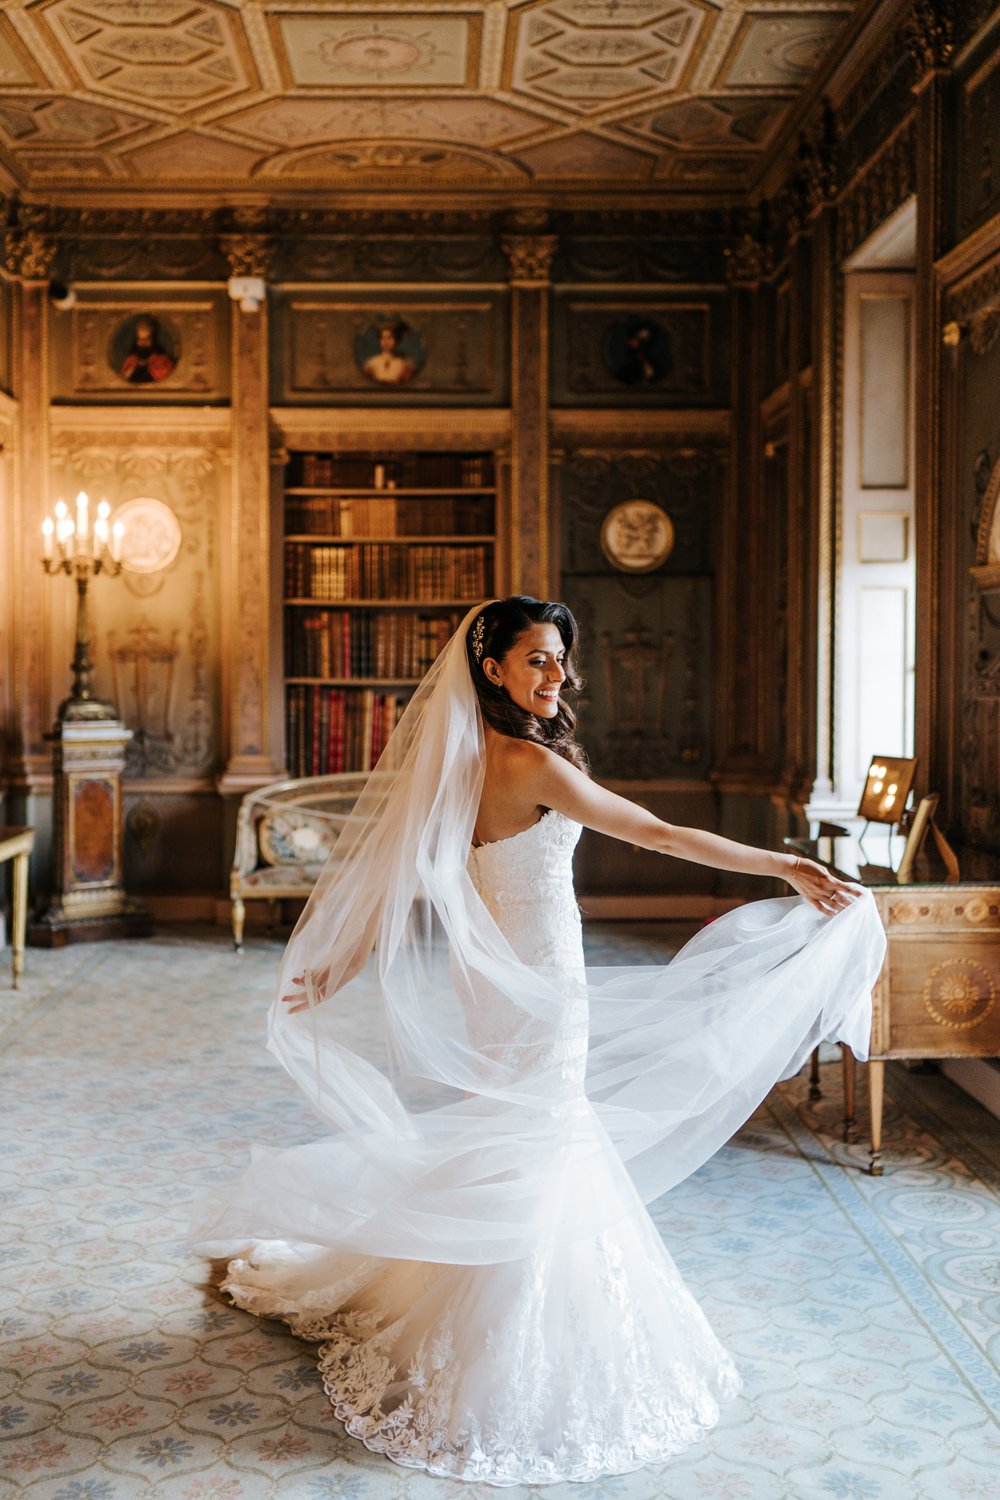 Bride twirls her white dress in Syon Park's long gallery after wedding ceremony